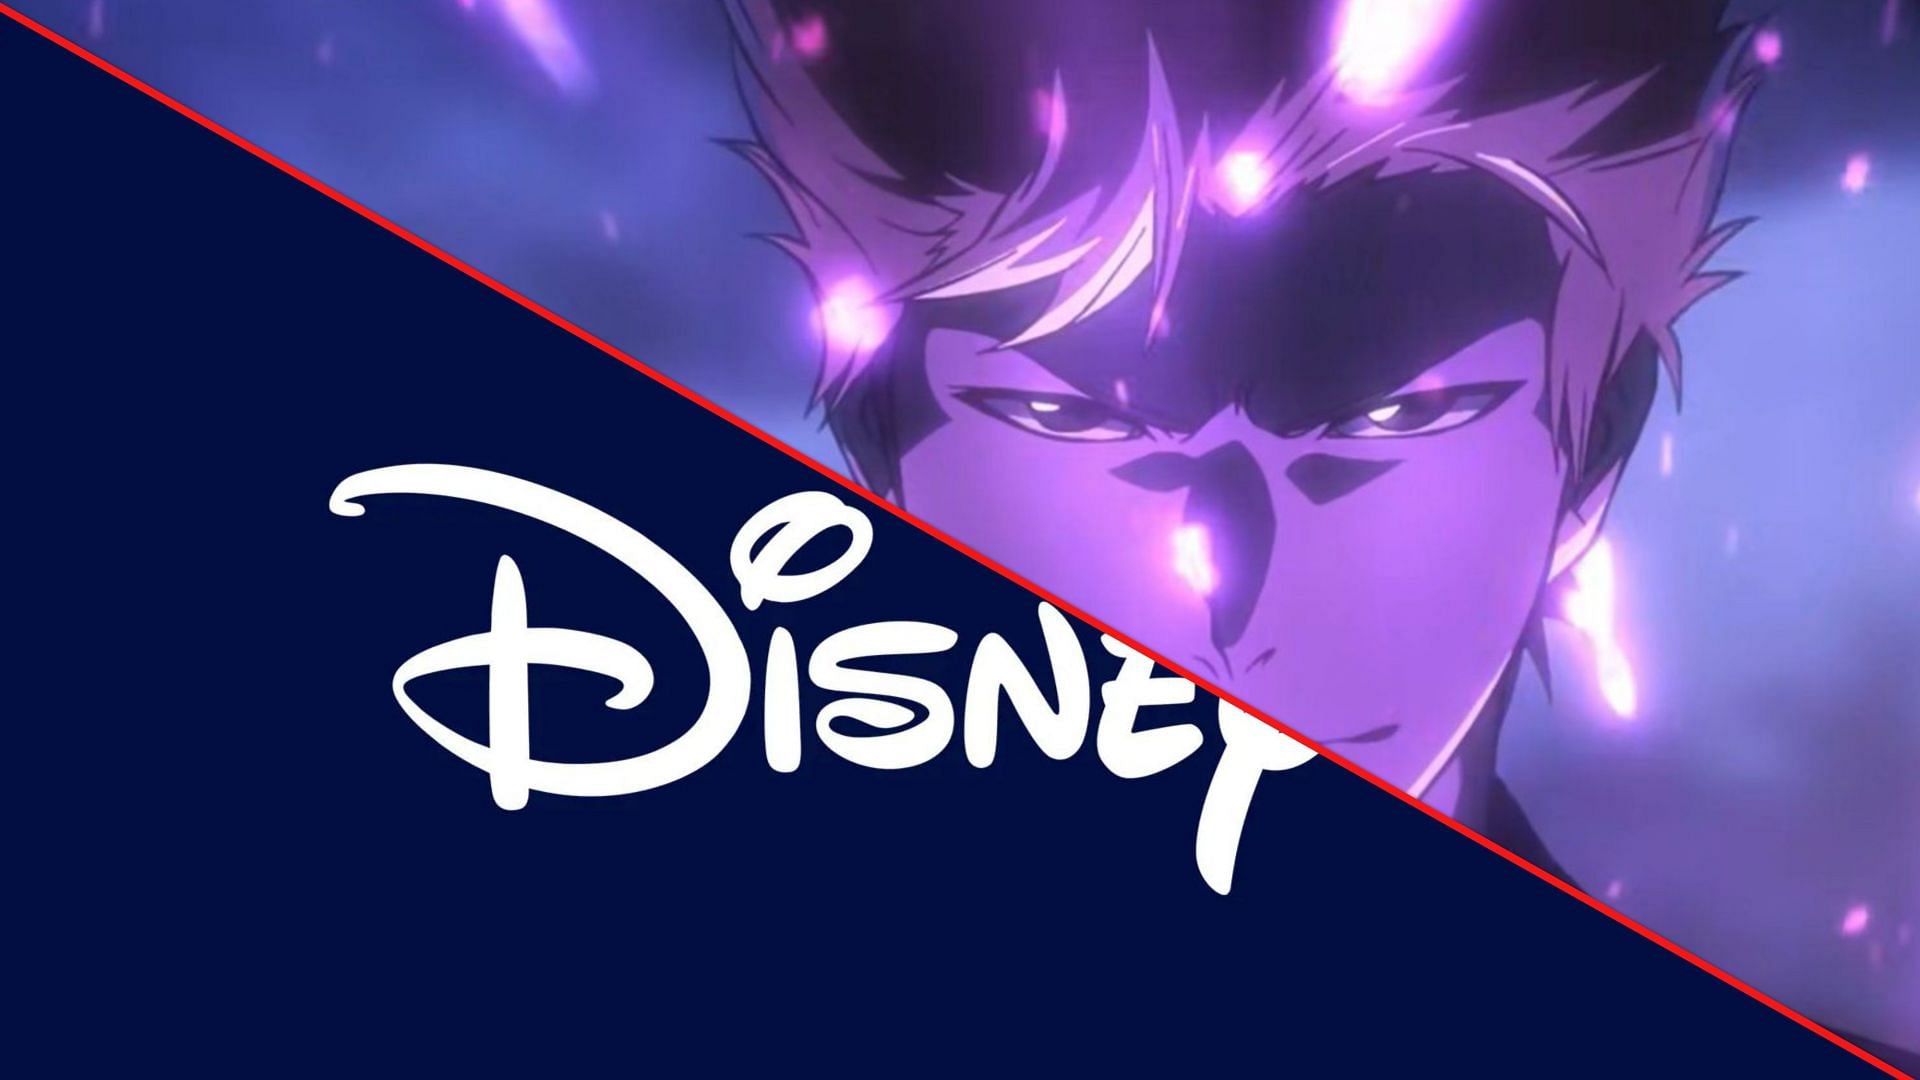 BLEACH: Thousand-Year Blood War is now streaming on Disney+ New Zealand.  Includes subs in English, Spanish and Portuguese. : r/DisneyPlus